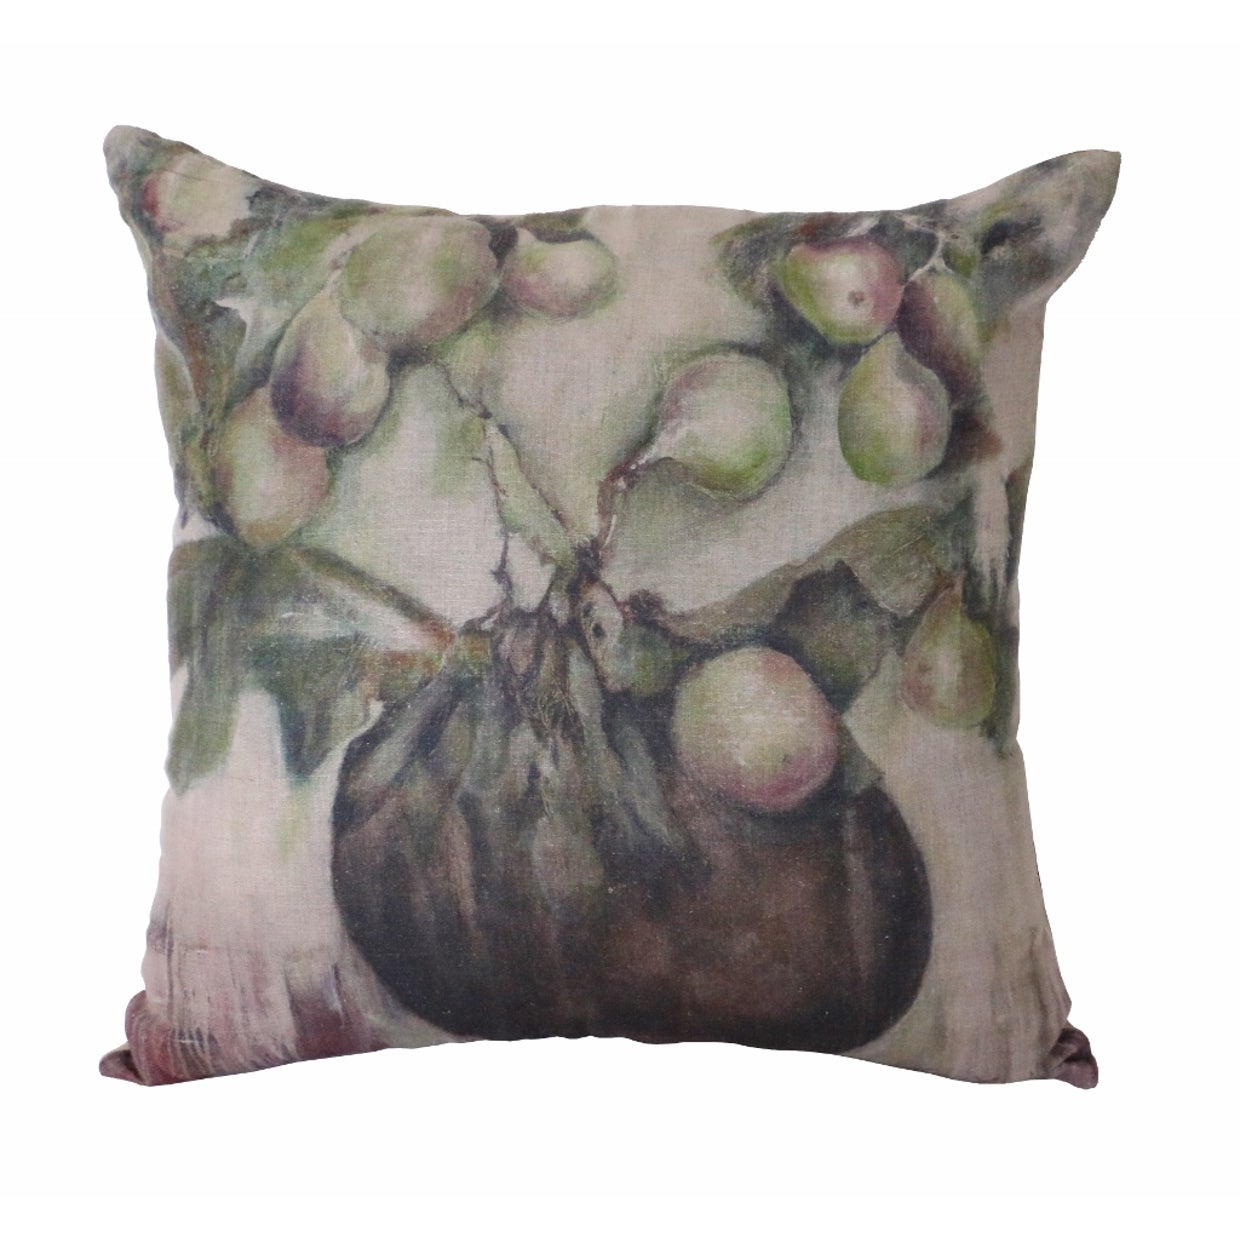 IVY & FIG LINEN CUSHION COVER 55 X 55